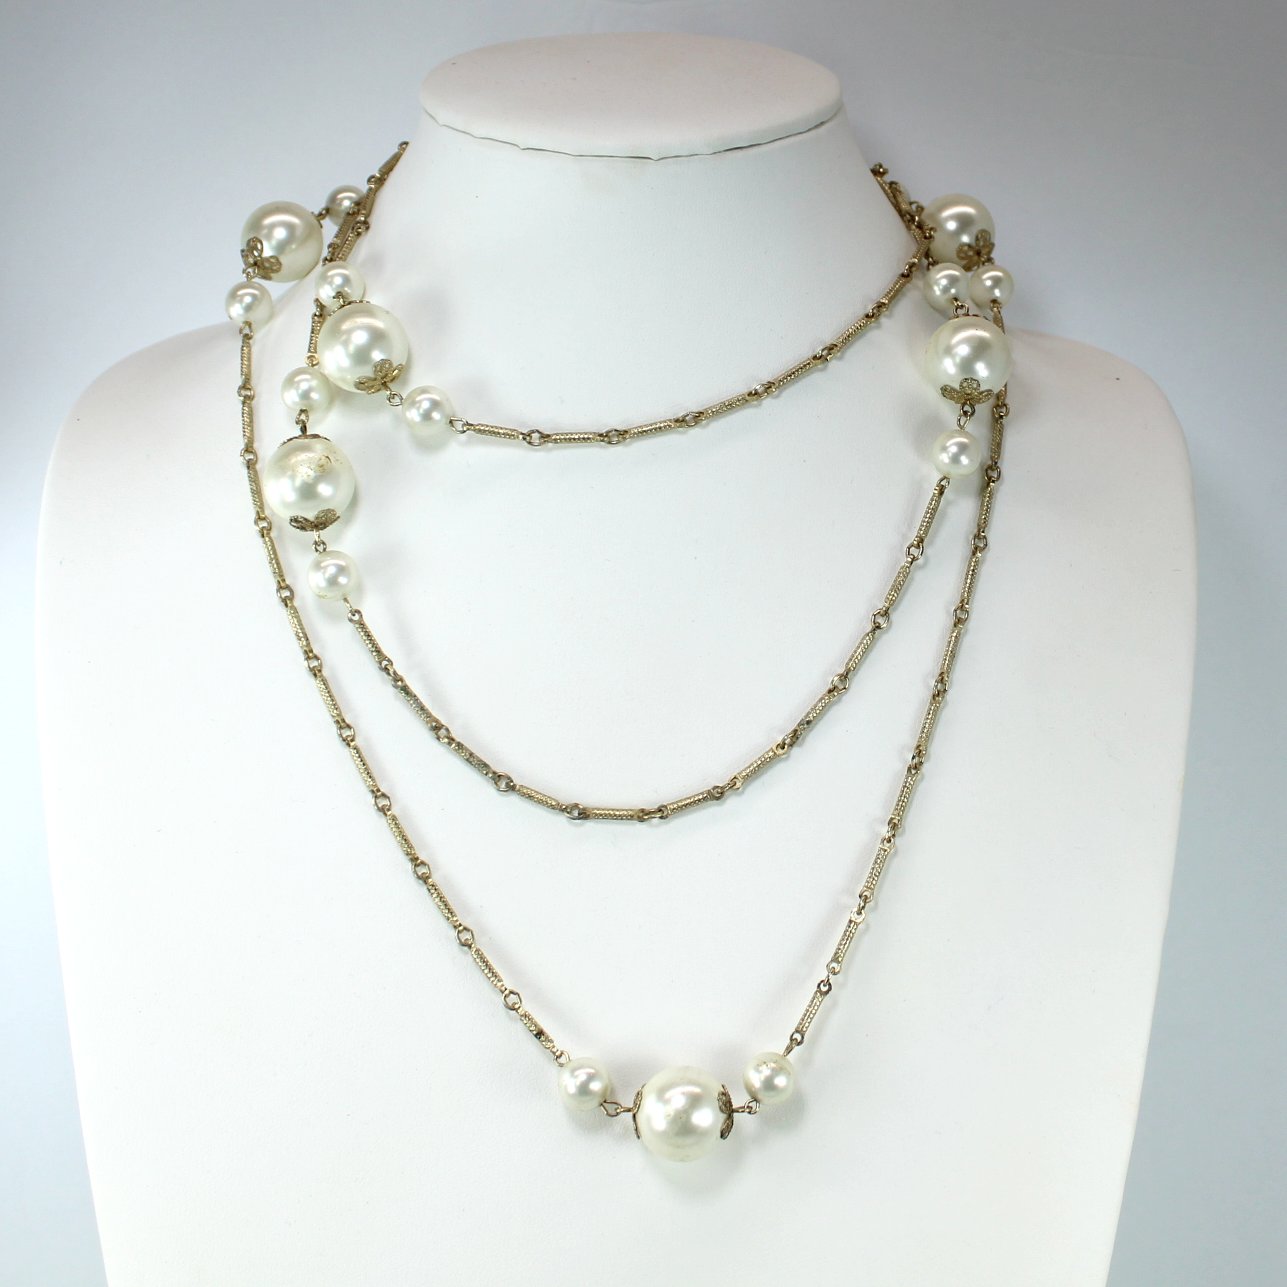 Coro 60" Long Vintage Necklace Pearls Gold Tone Chain Links wrap it your way for occasion